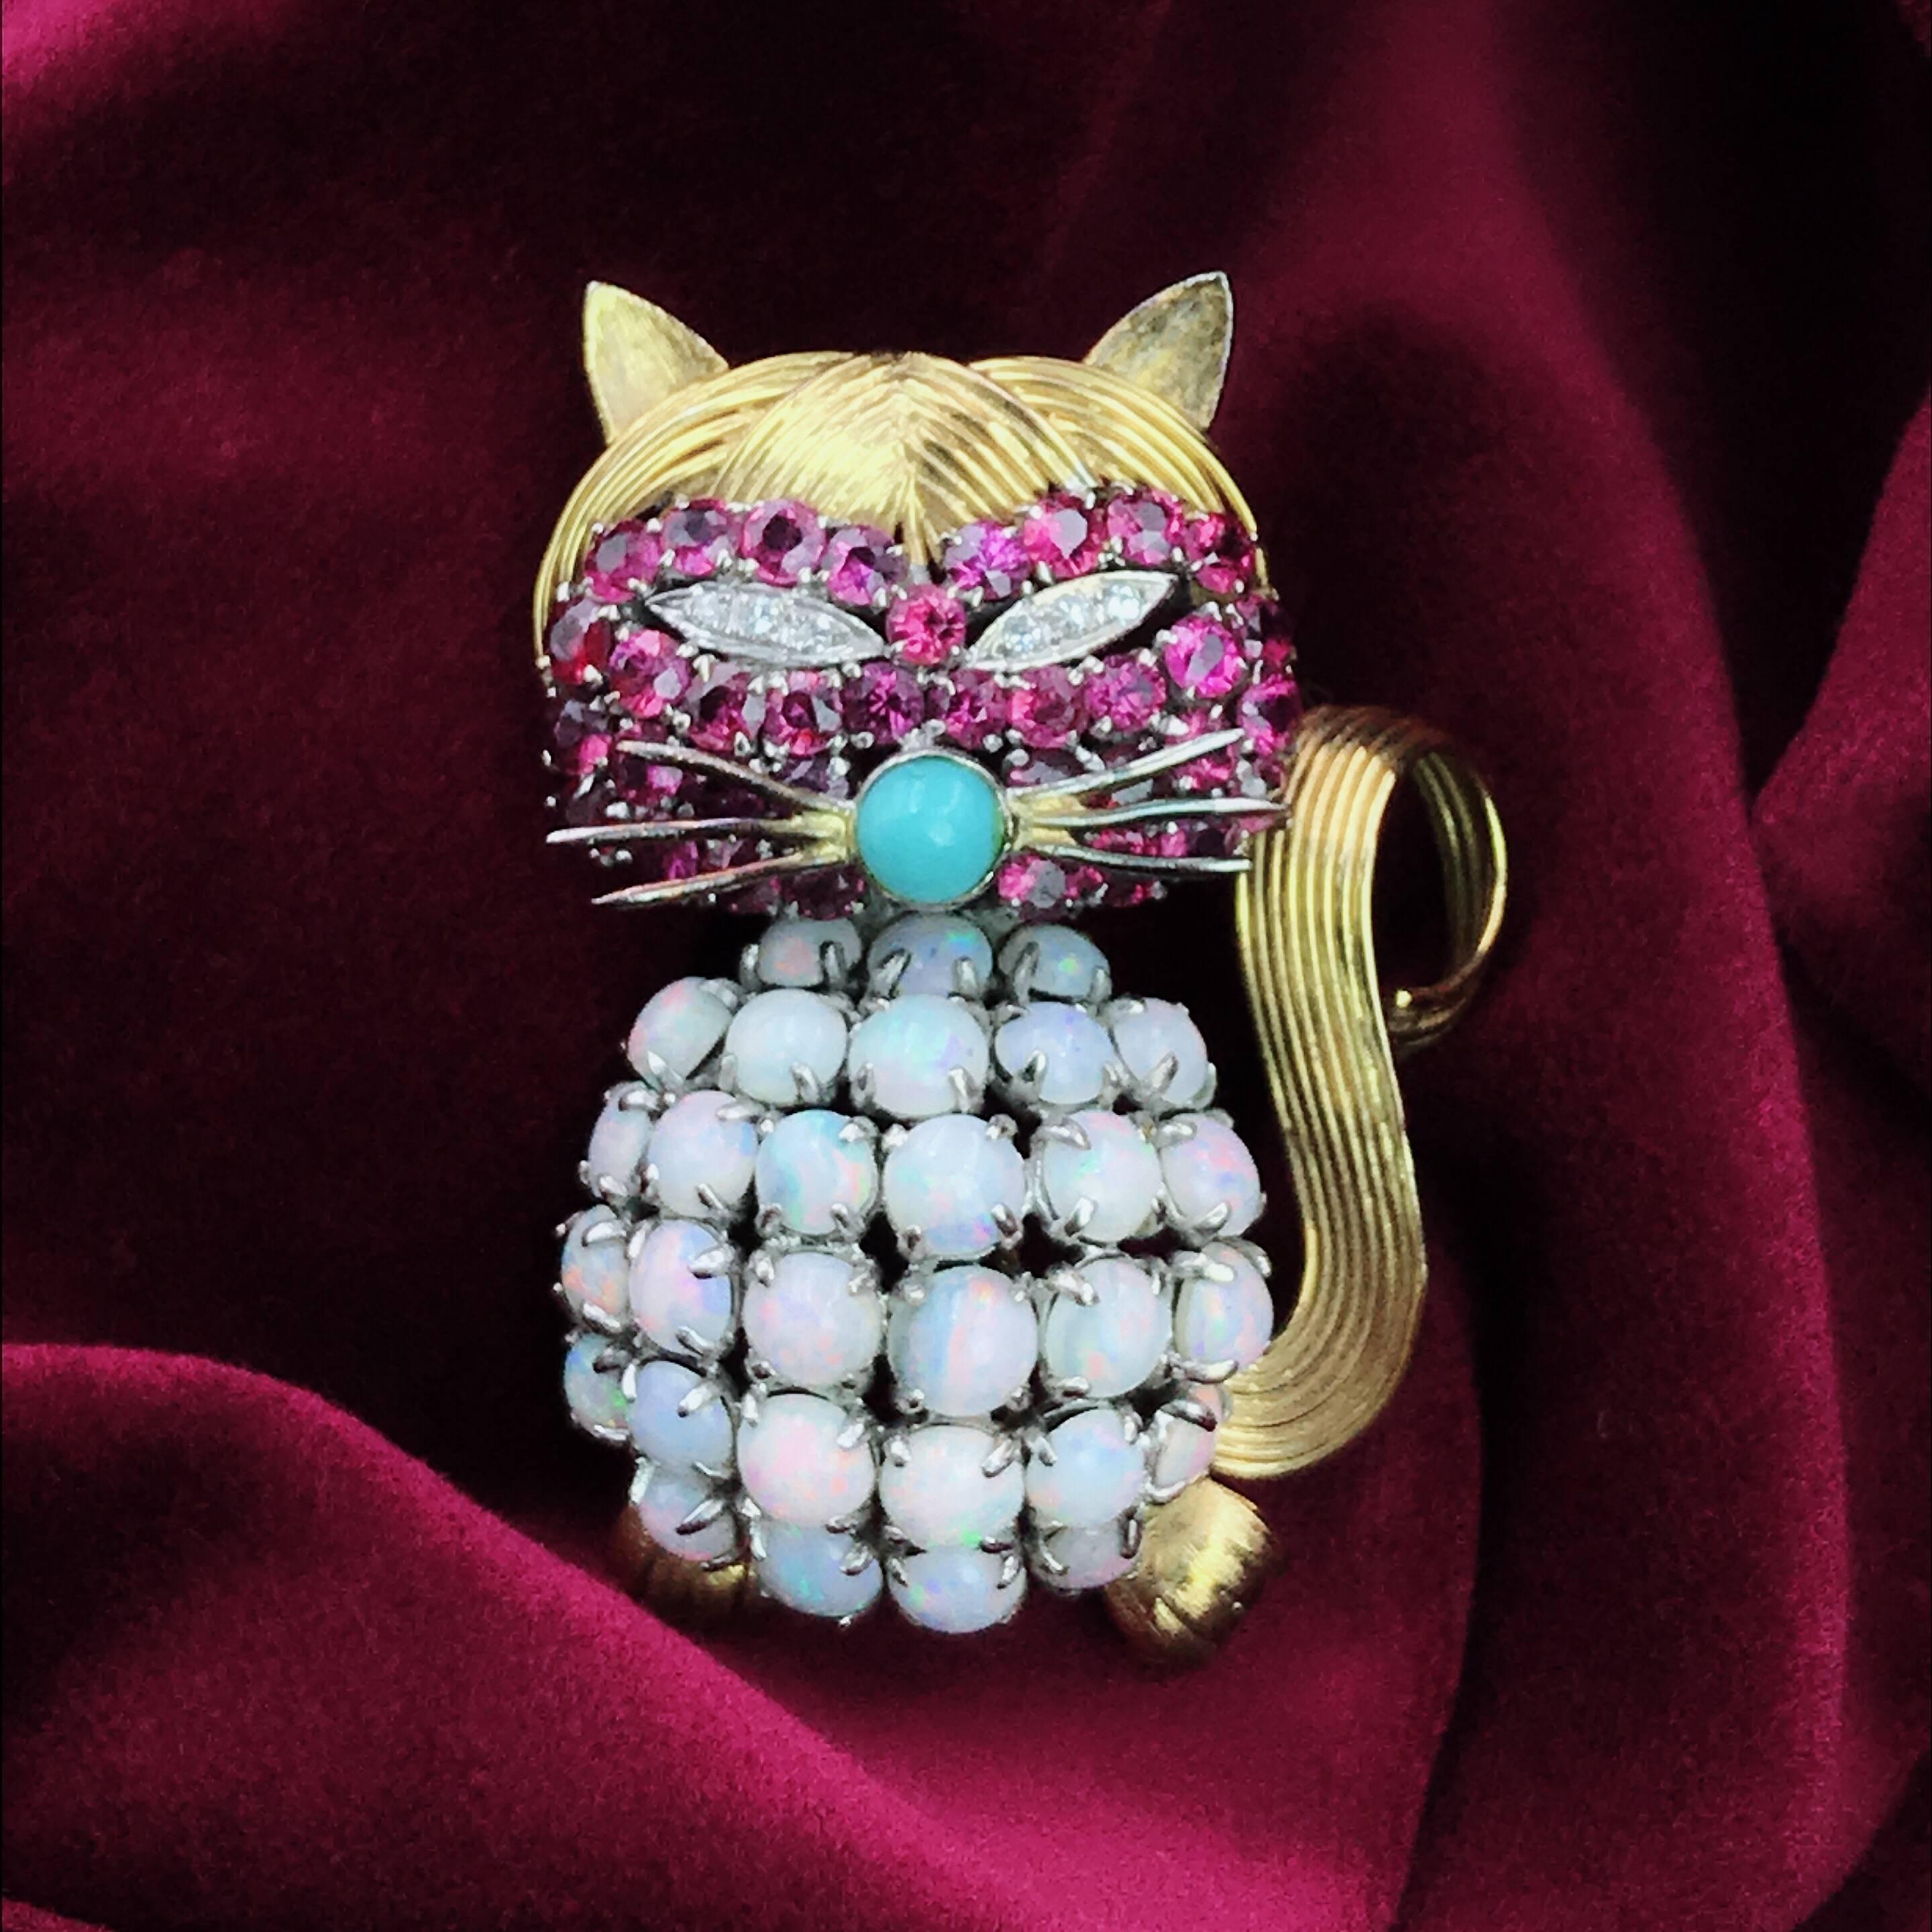 Opal Ruby Diamond and Turquoise Cat Pin. Crafted out of 14K yellow gold, with a belly of round opal cabochons, round-cut rubies on the face, weighing approximately 2.55 carats, round-cut diamonds for the eyes and turquoise for the nose; measures